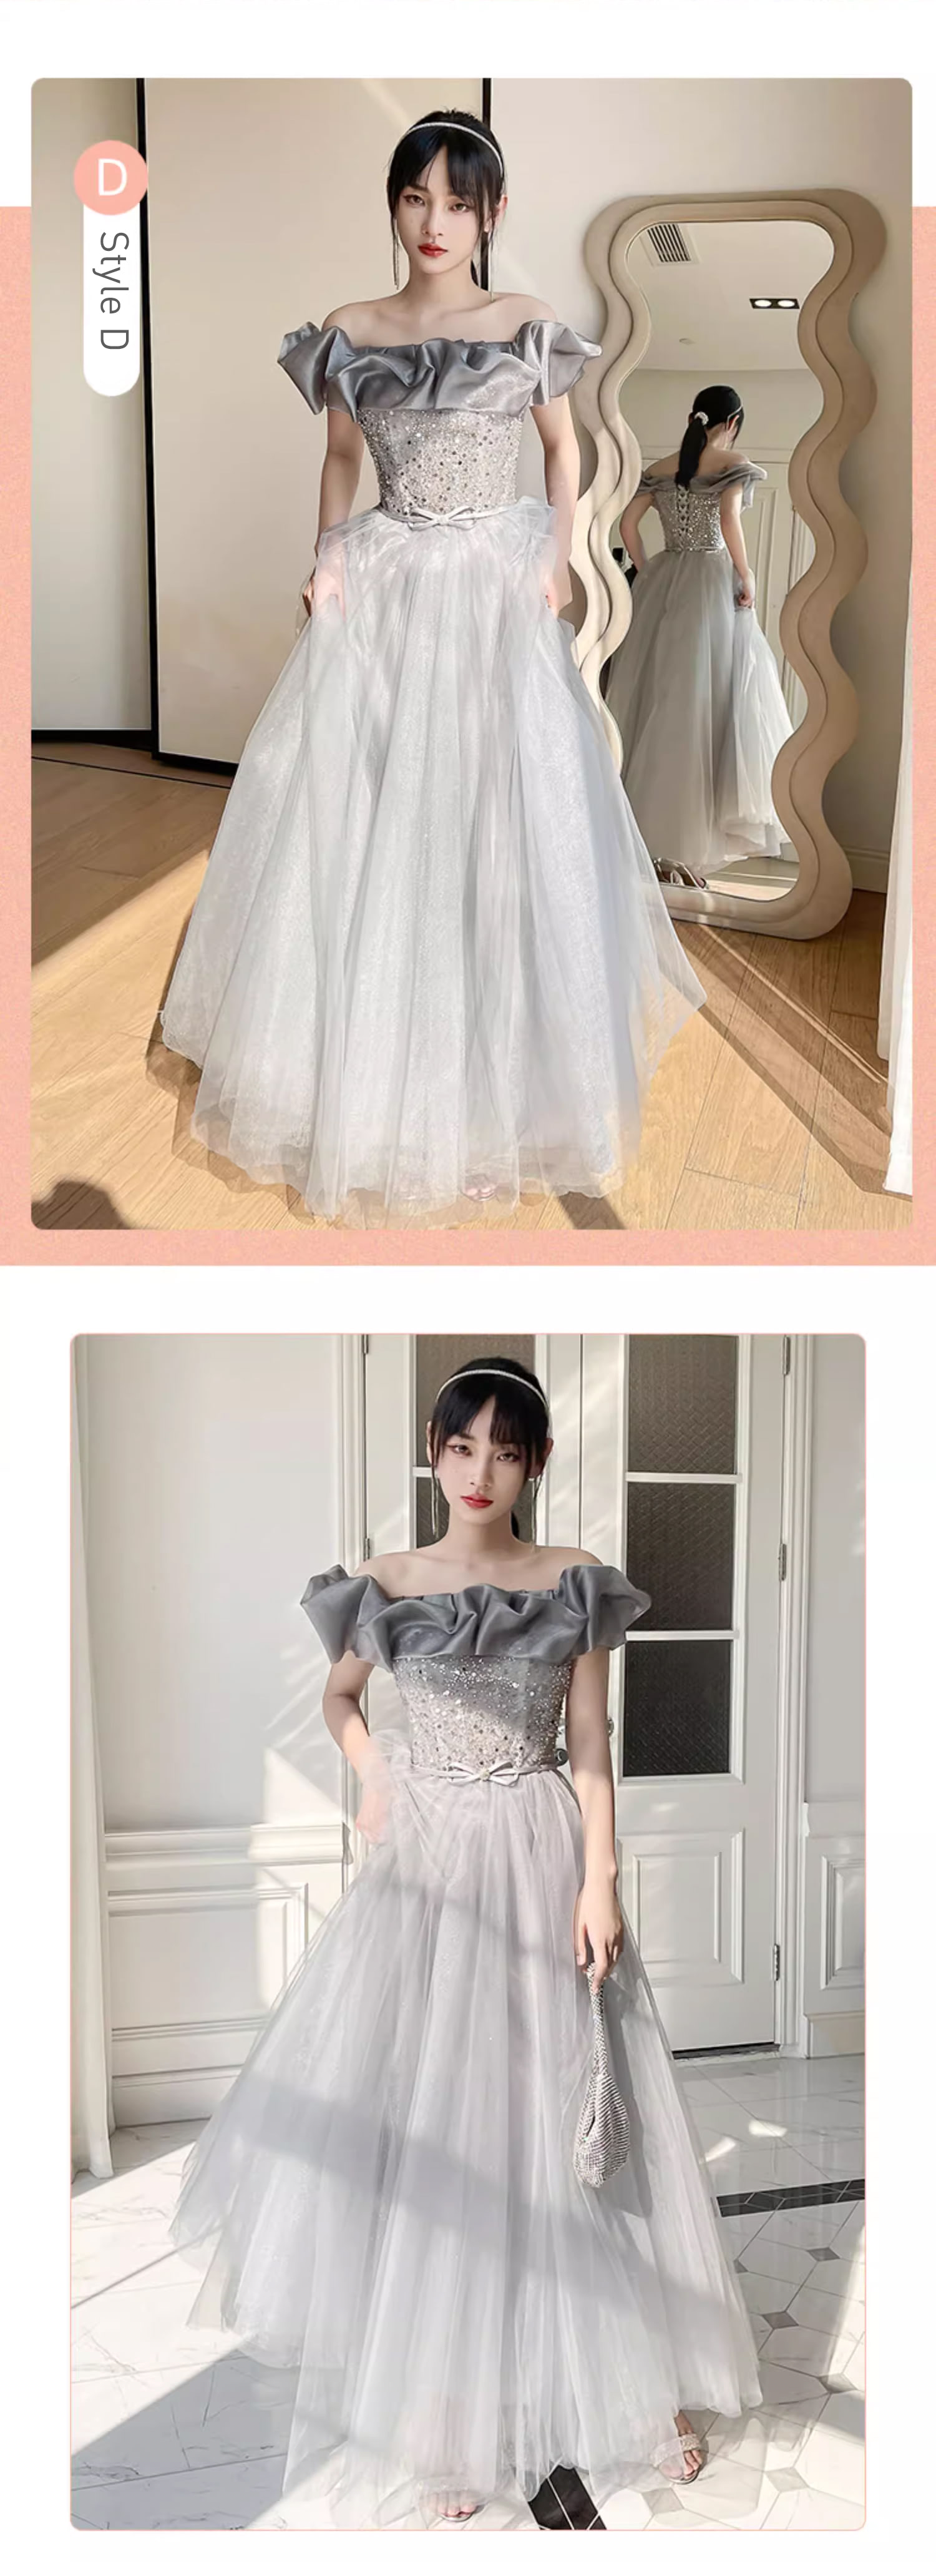 Fashion-A-line-Summer-Grey-Tulle-Evening-Prom-Bridesmaid-Maxi-Dress20